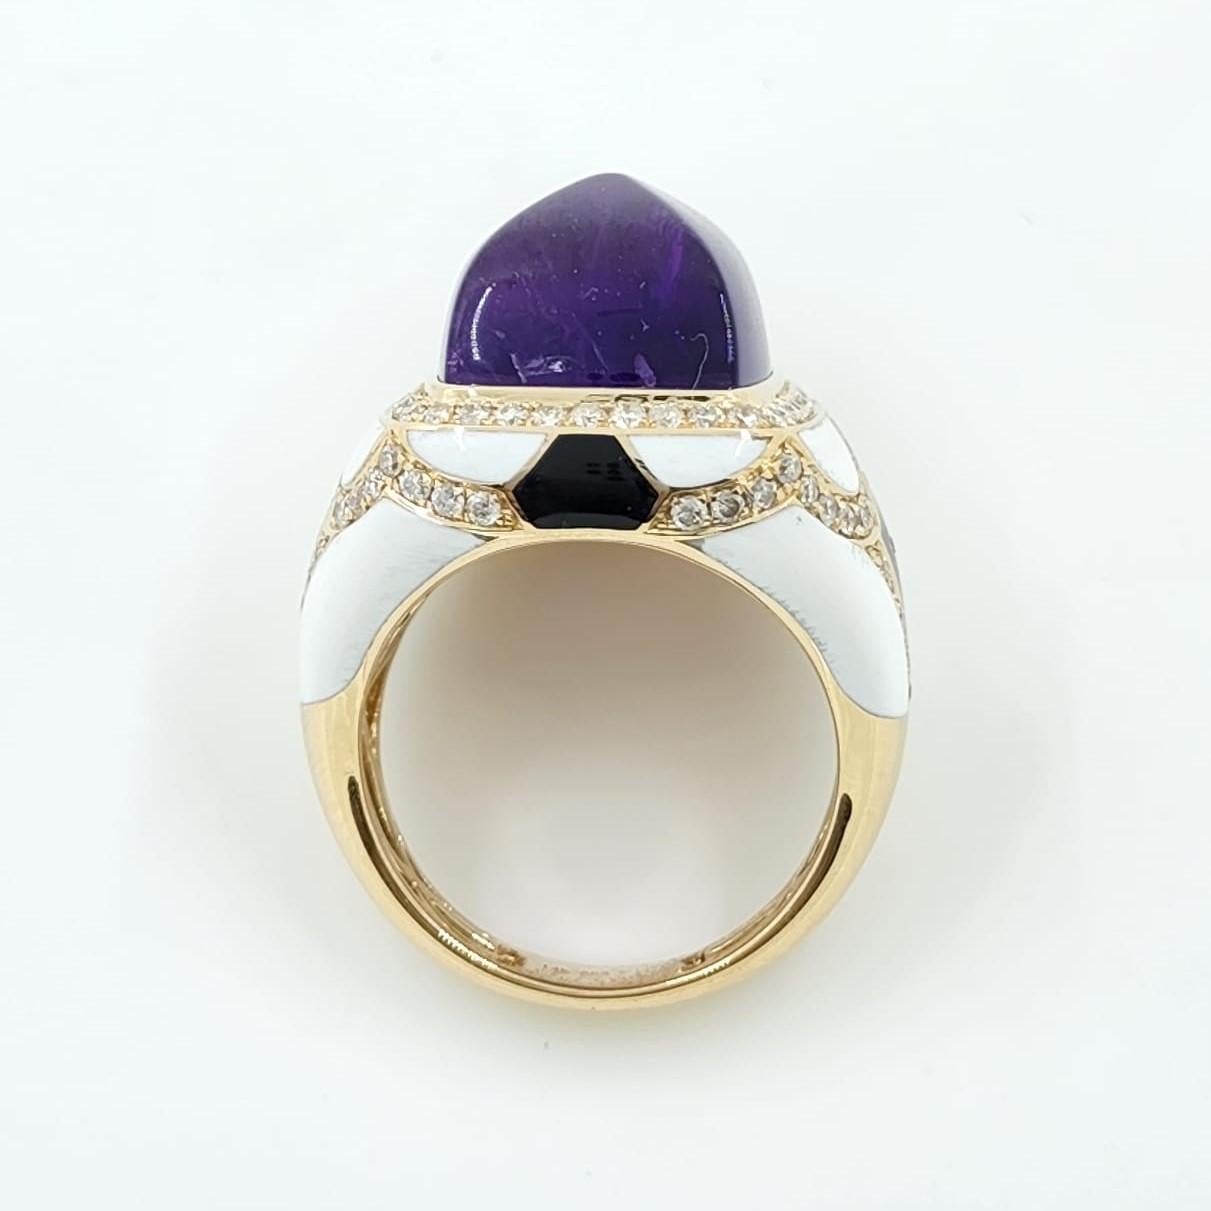 Sugarloaf Cabochon Amethyst Diamond Cocktail Ring with Enamel in 14 Karat Yellow Gold